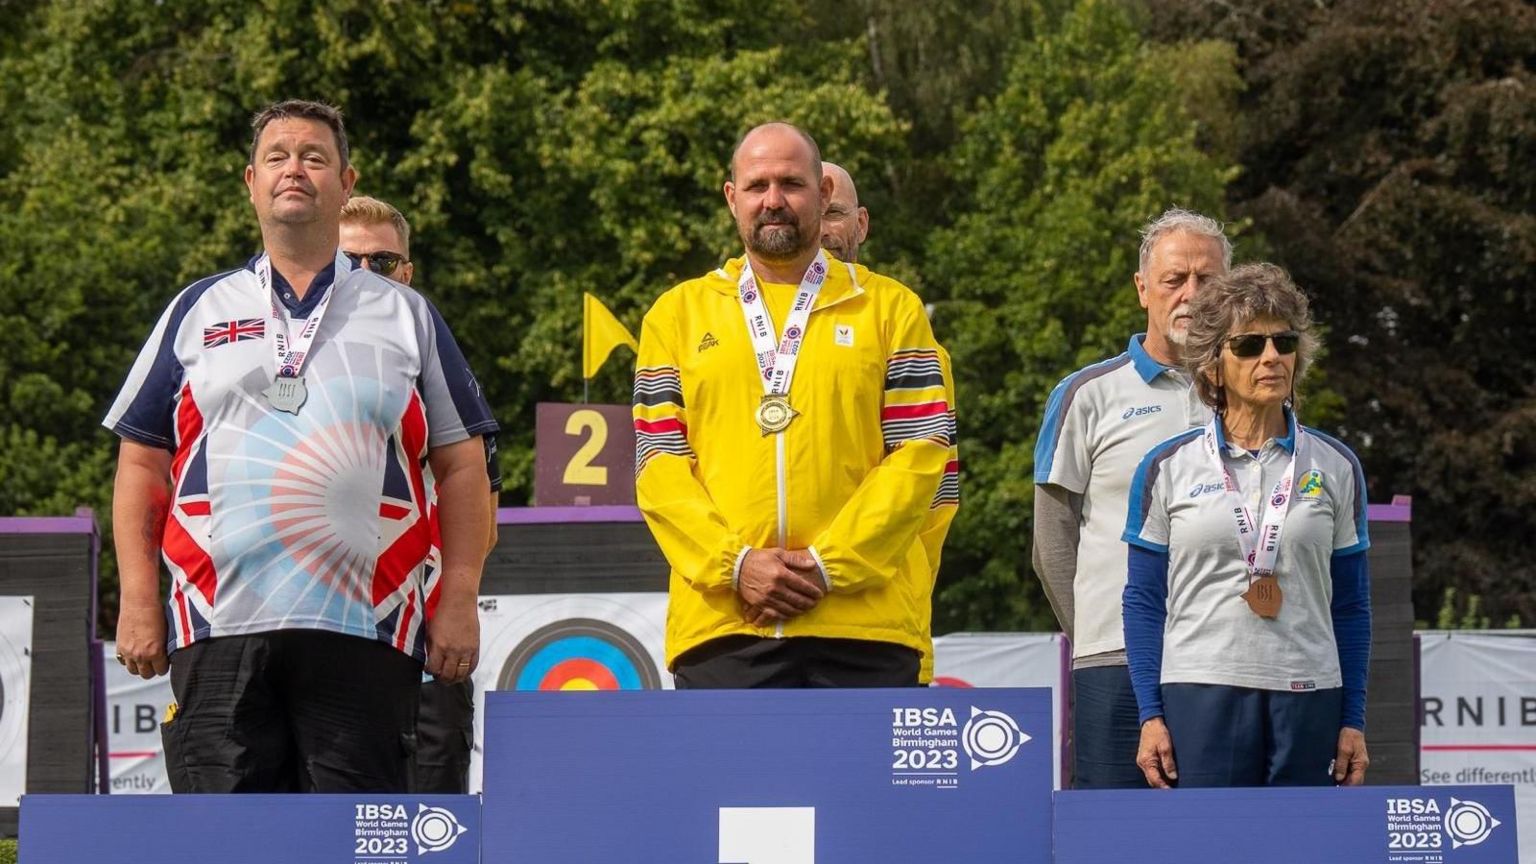 Clive Jones stands on the 2nd place podium in team GB clothing 